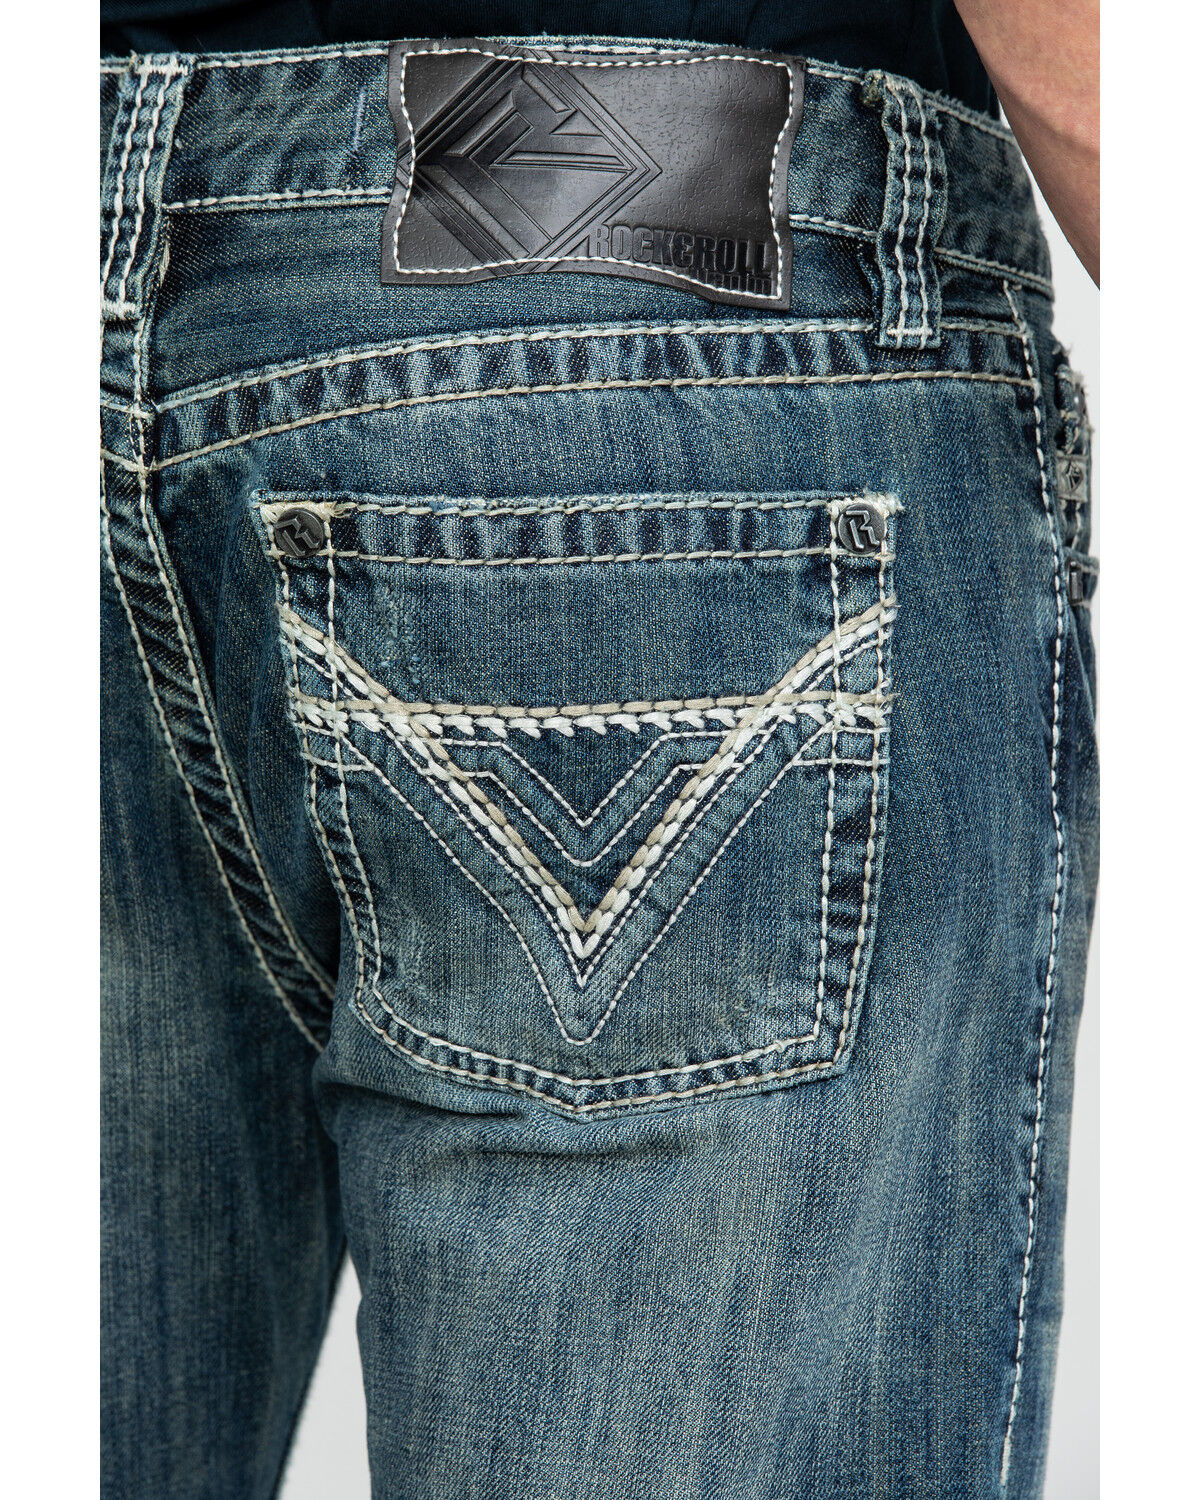 Rock and Roll Cowboy Pistol Back Pocket Embroidery Mens Slim Fit Boot Cut Jean